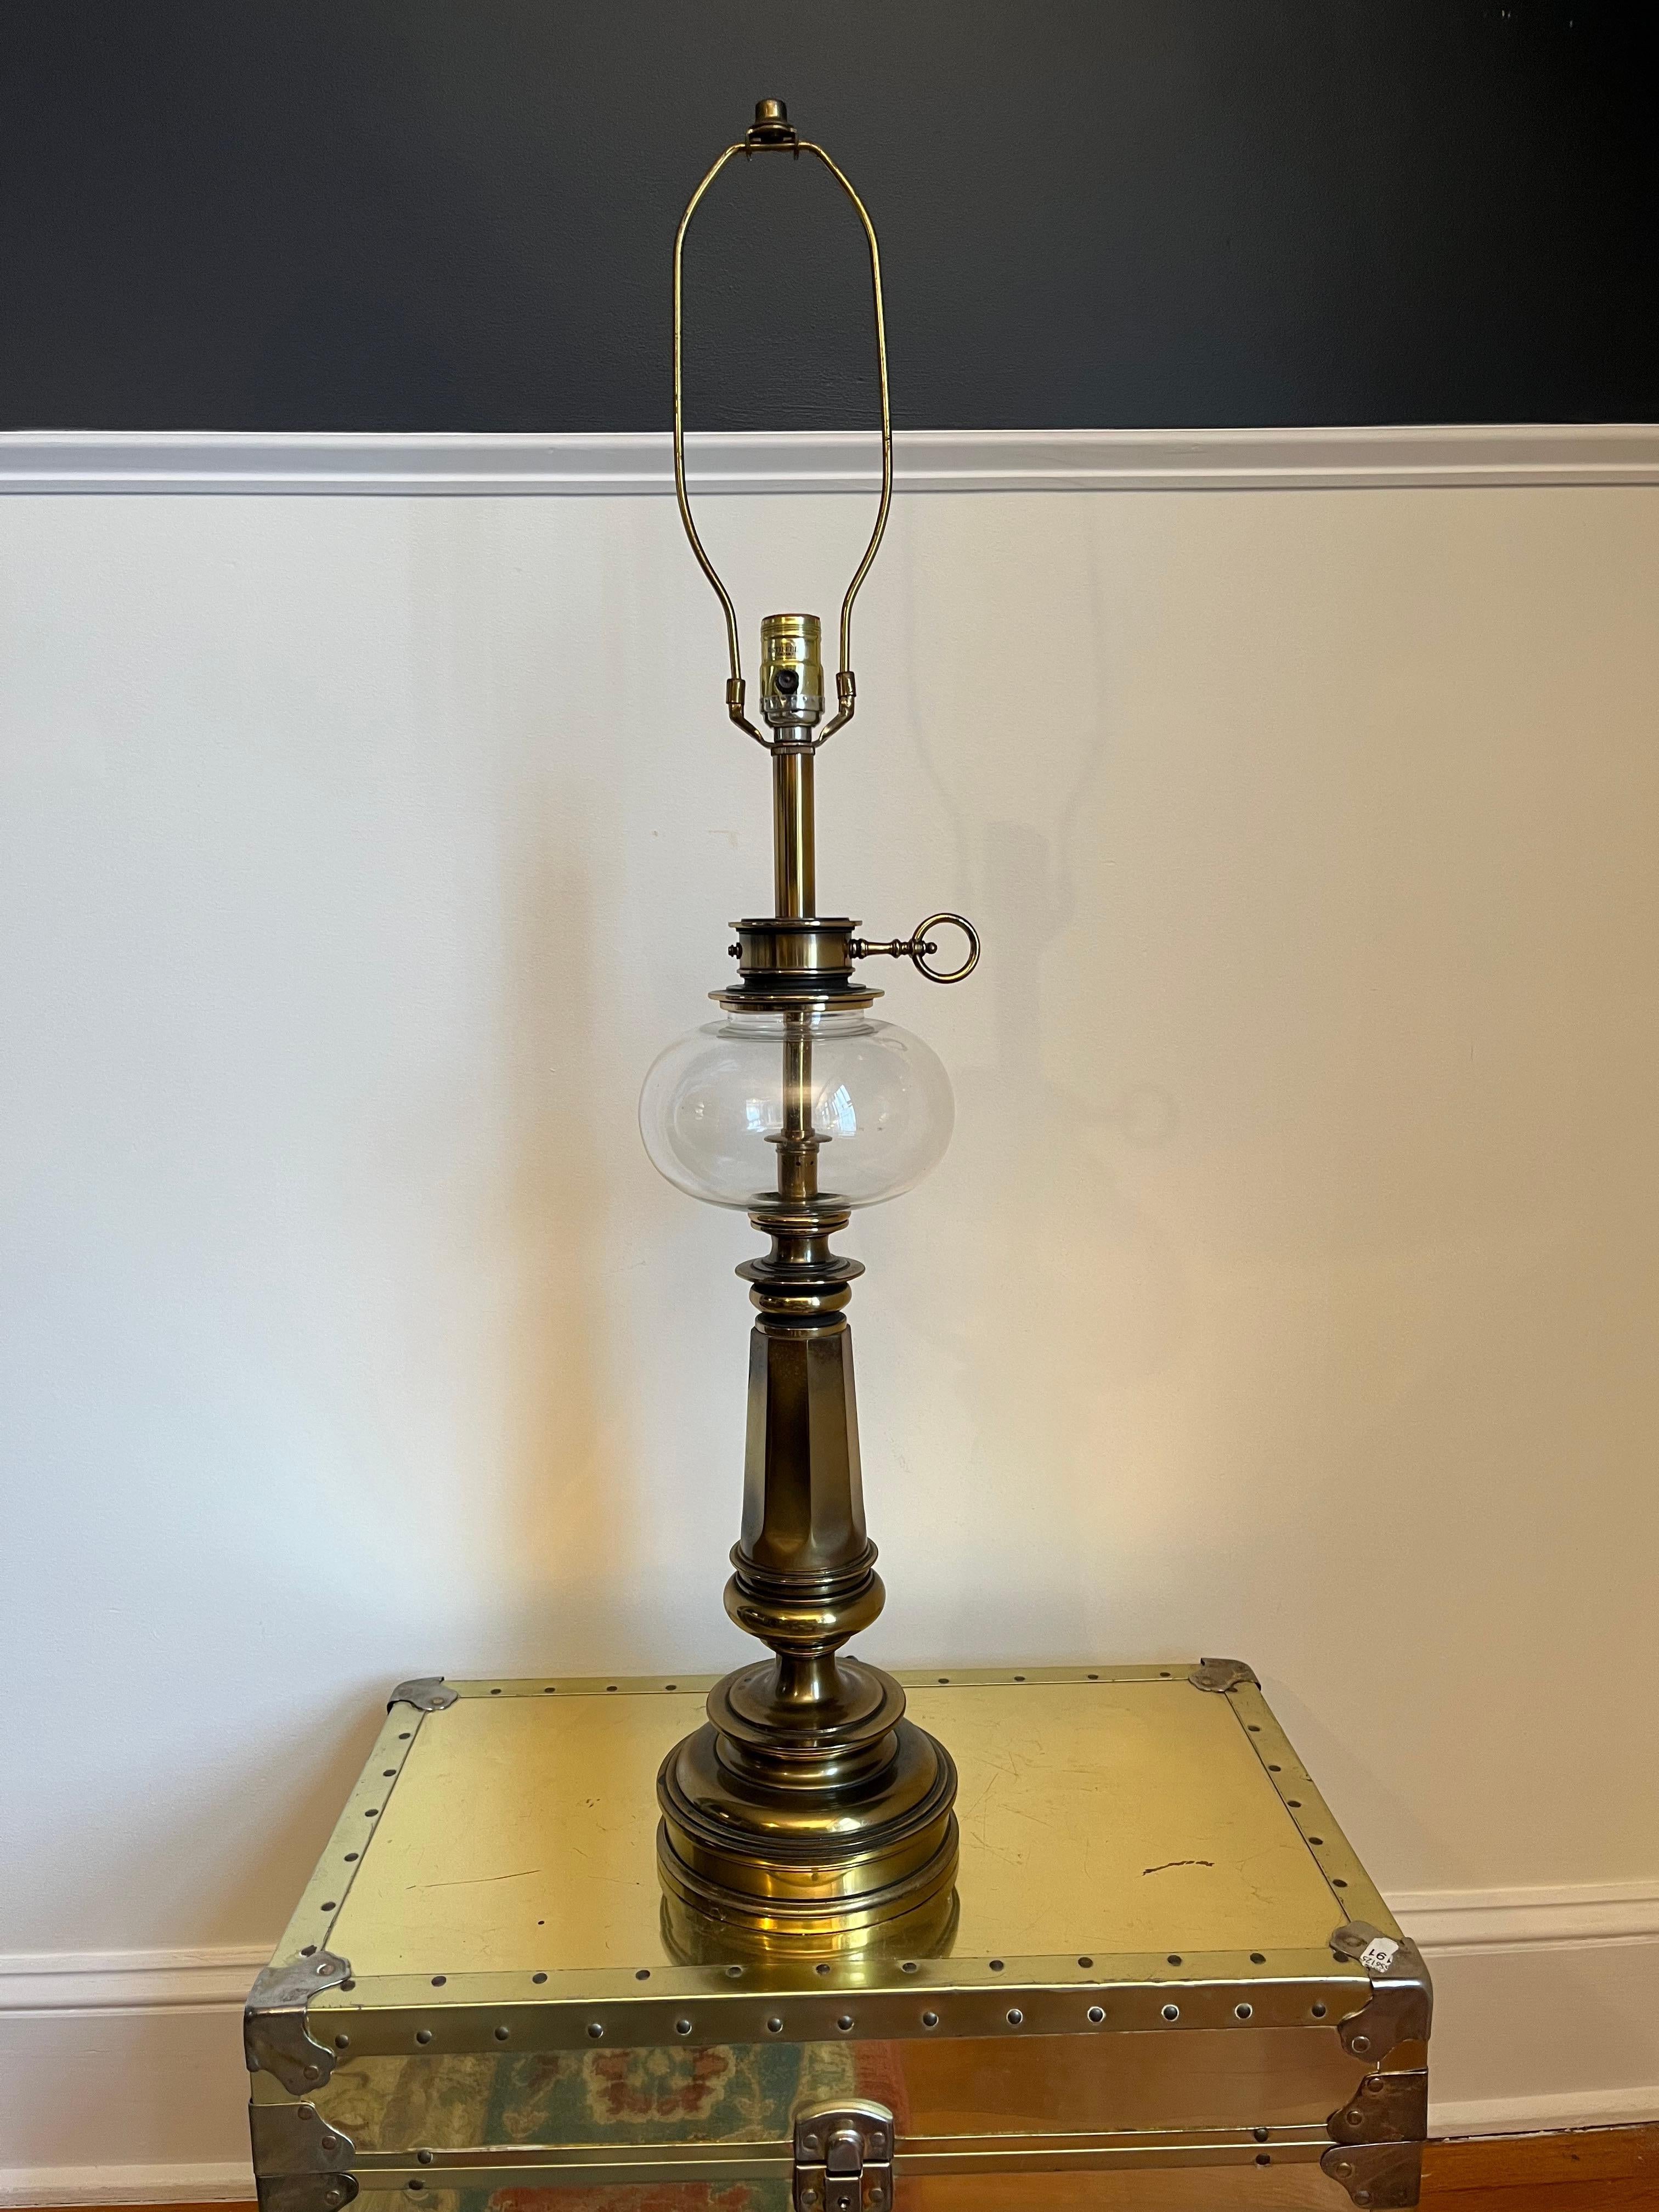 Vintage oil-lamp style table lamp with fluted brass column base. Substantial bulbous oil reservoir with key turn.  Switch on both base and socket. Classic design.
Curbside to NYC/Philly $300